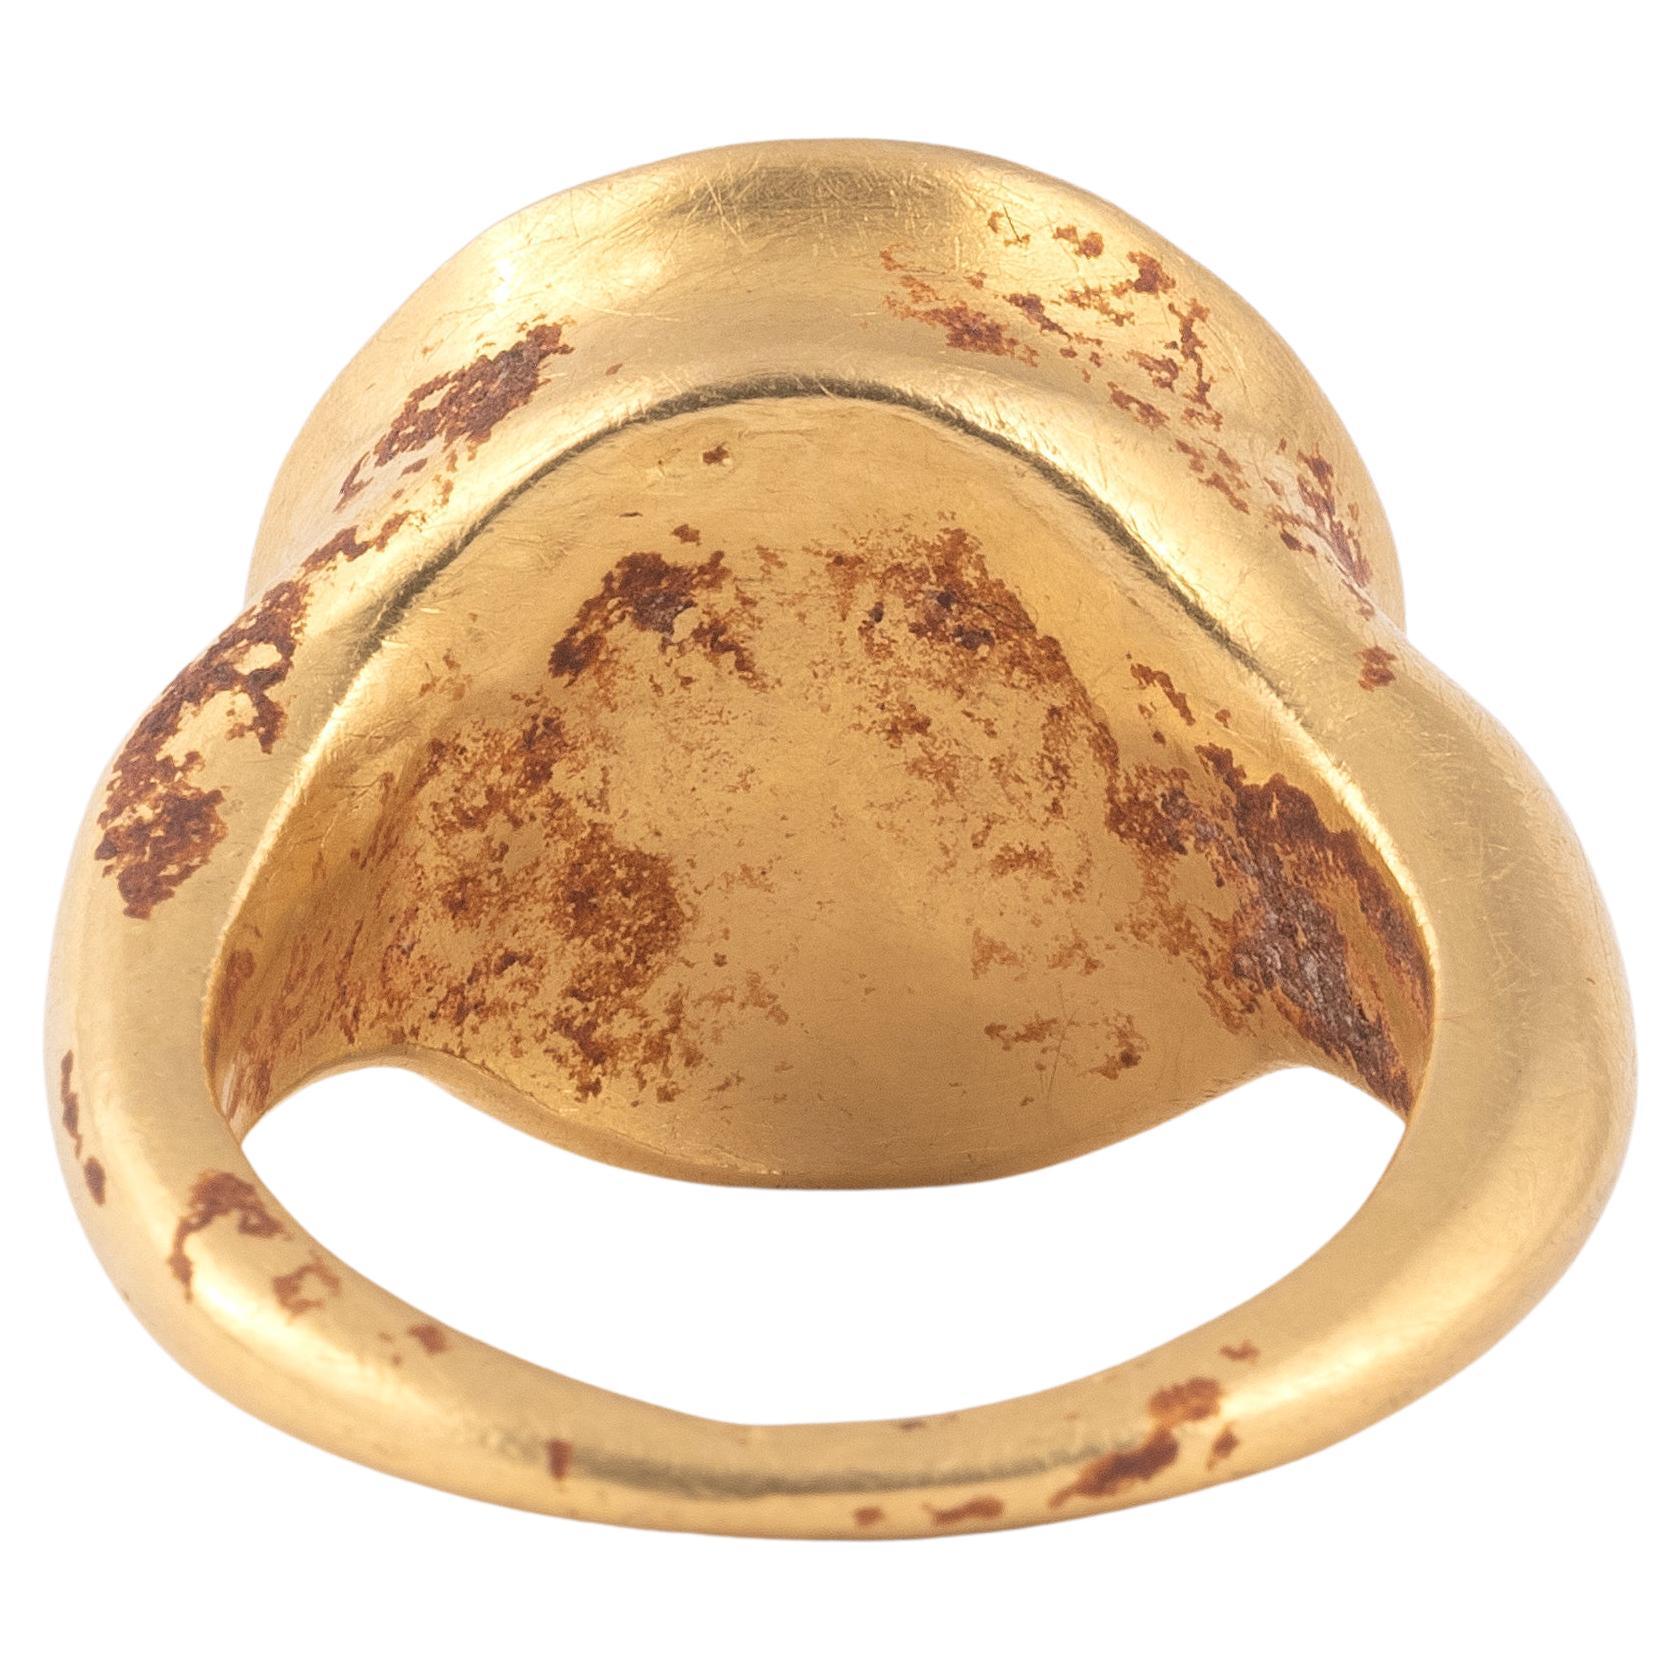 A large hollow gold ring with a cameo of a boy shown three quarters facing towards the right. Some have suggested that these are portraits of the young Caracalla. It might be difficult to argue this other than for the determination of Septimius